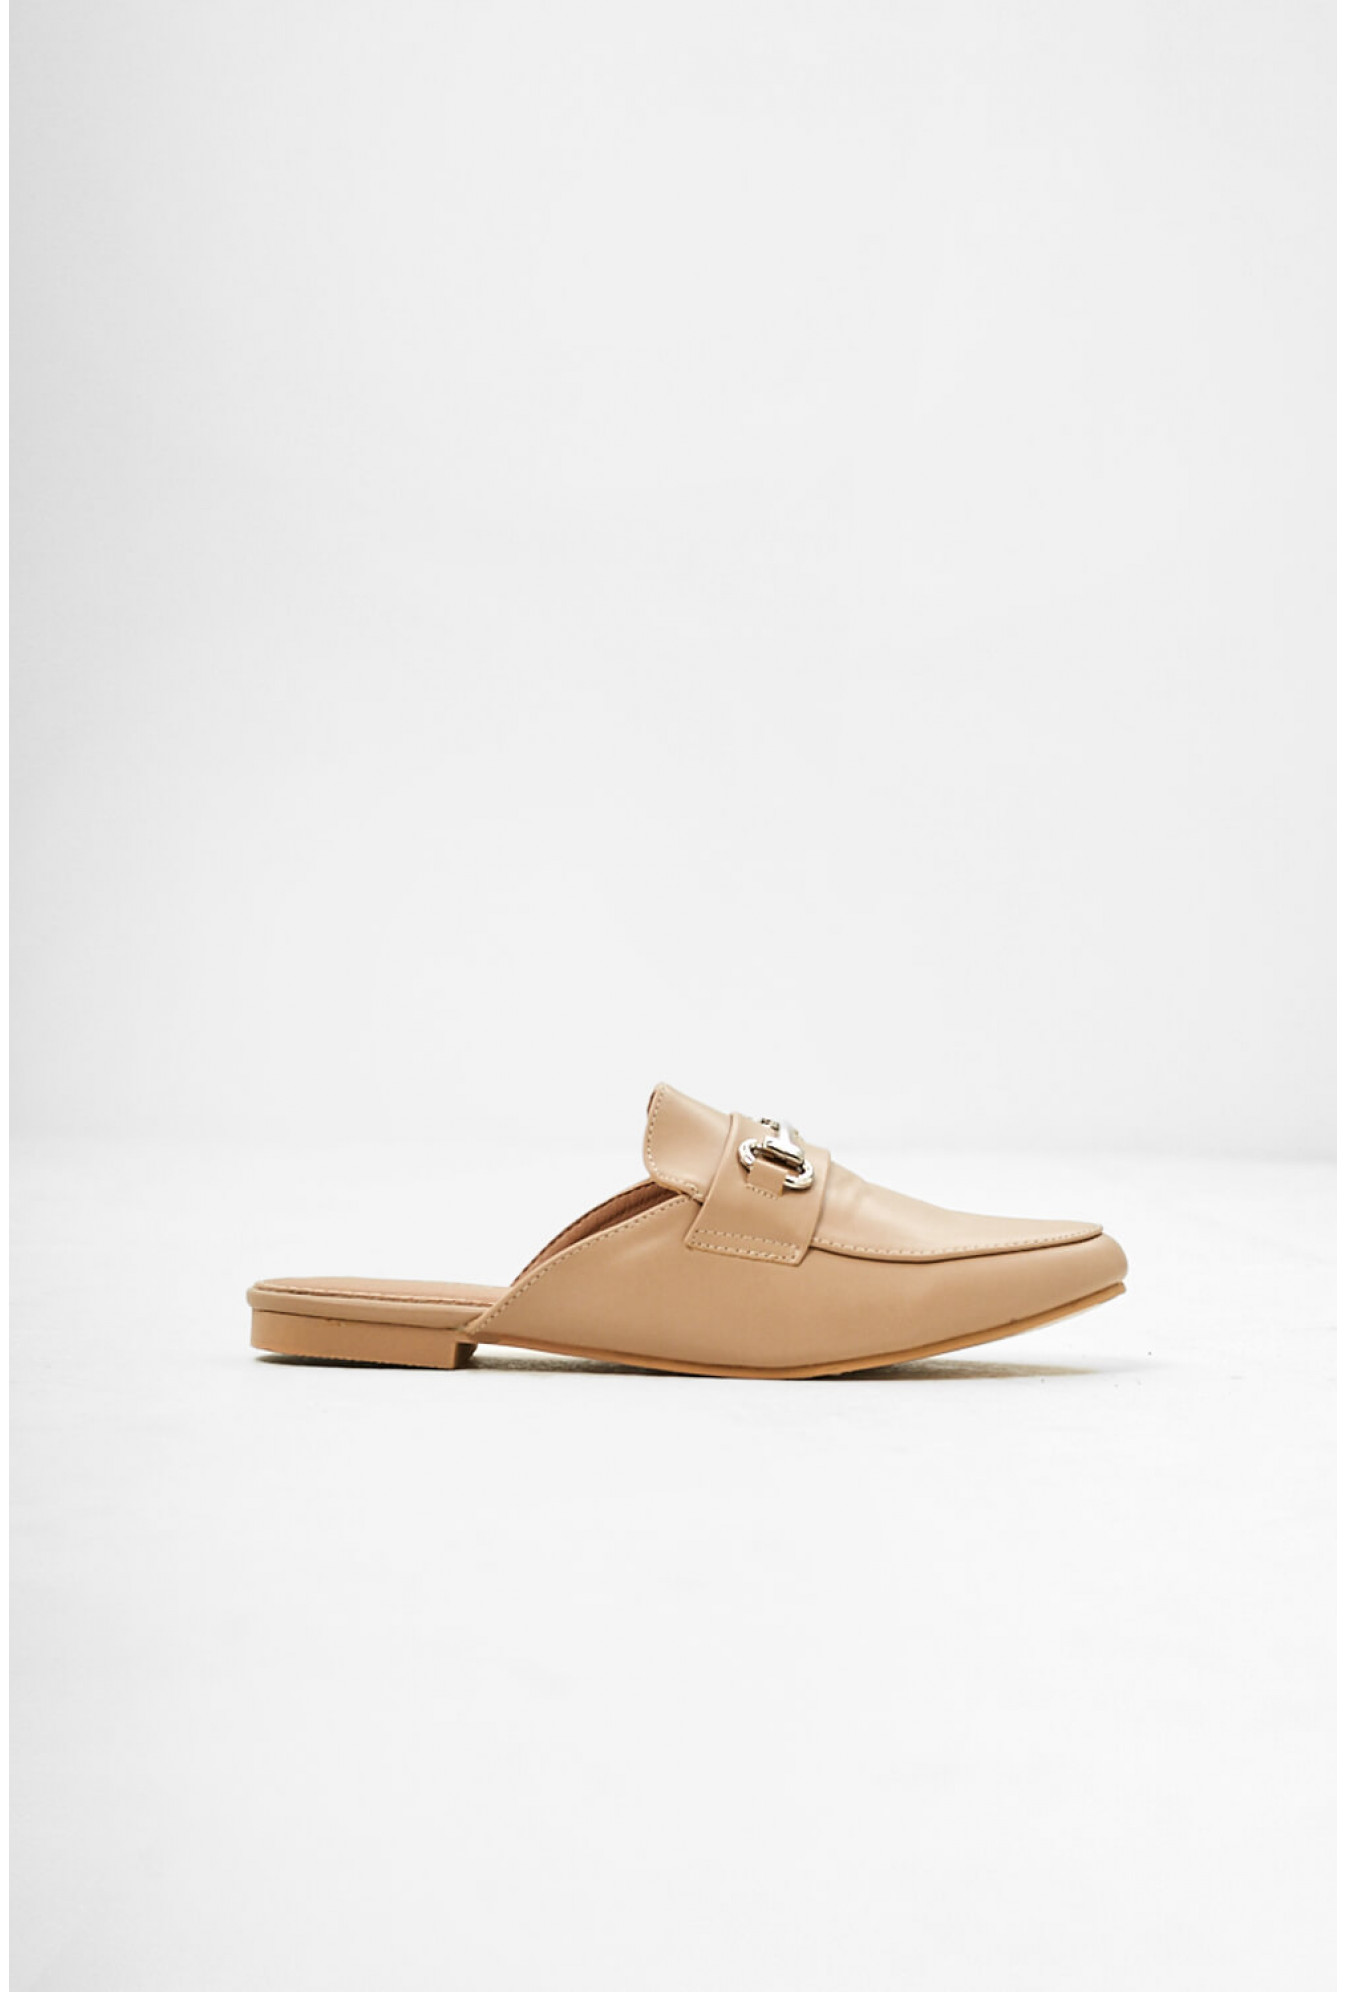 Georgia Backless Mule Loafers in Nude